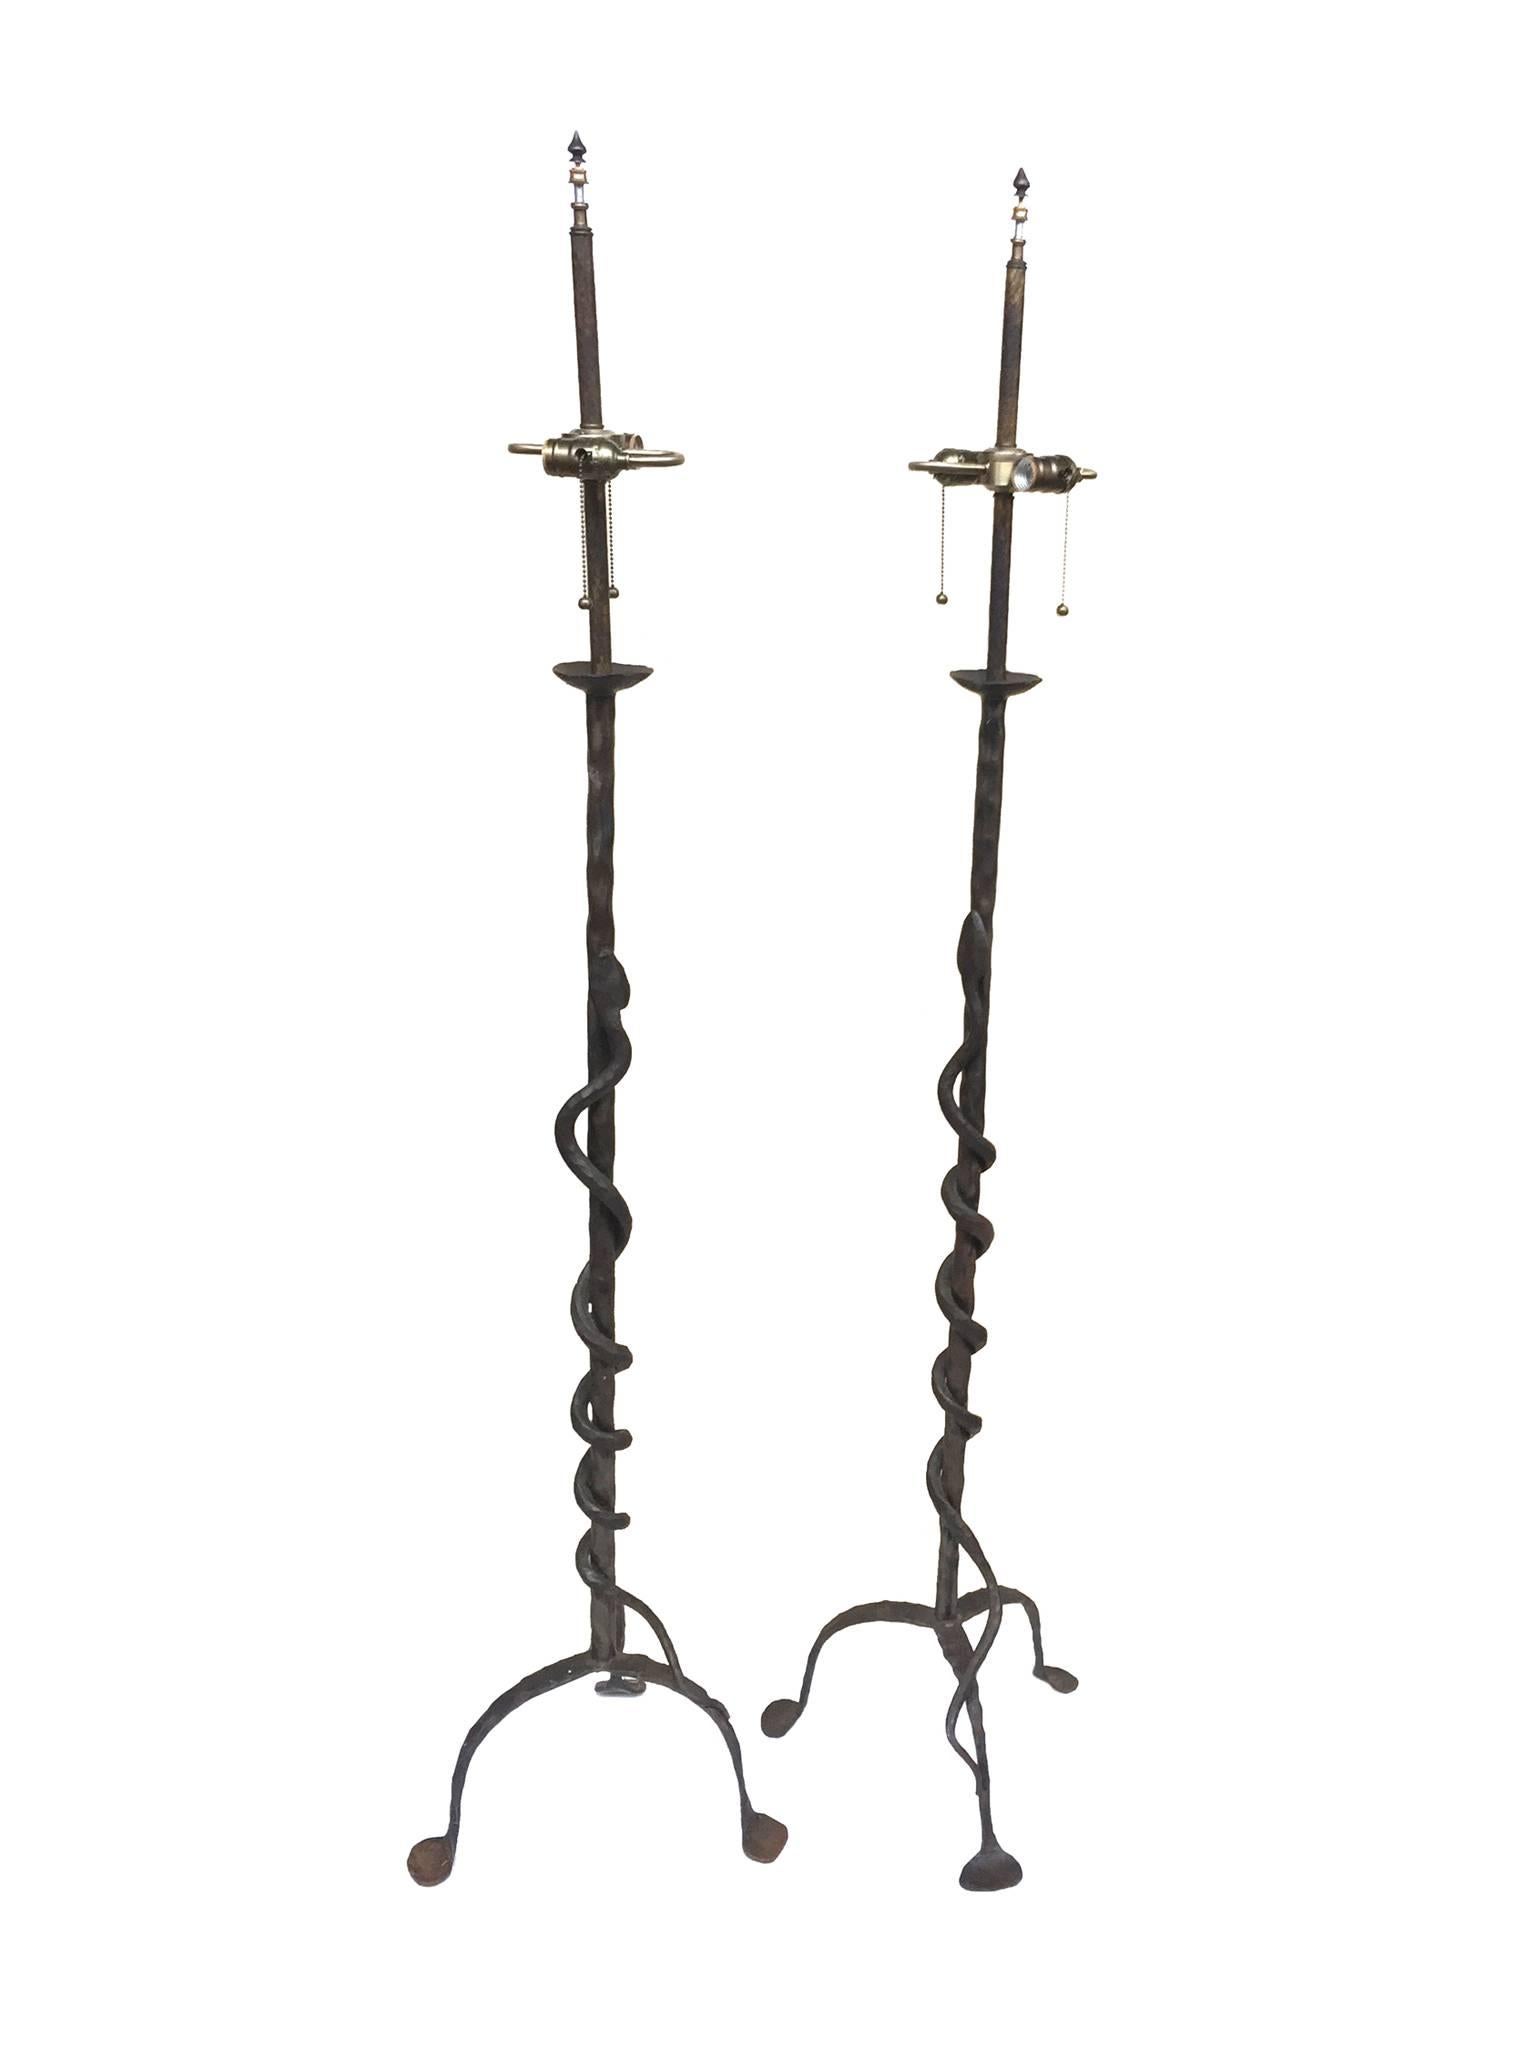 These floor lamps are comprised of hand-forged iron with. Their most striking feature is a coiled snake design, which wraps around the pole and winds down to the three-legged base. The lamps are newly rewired with new brass hardware. Each lamp can